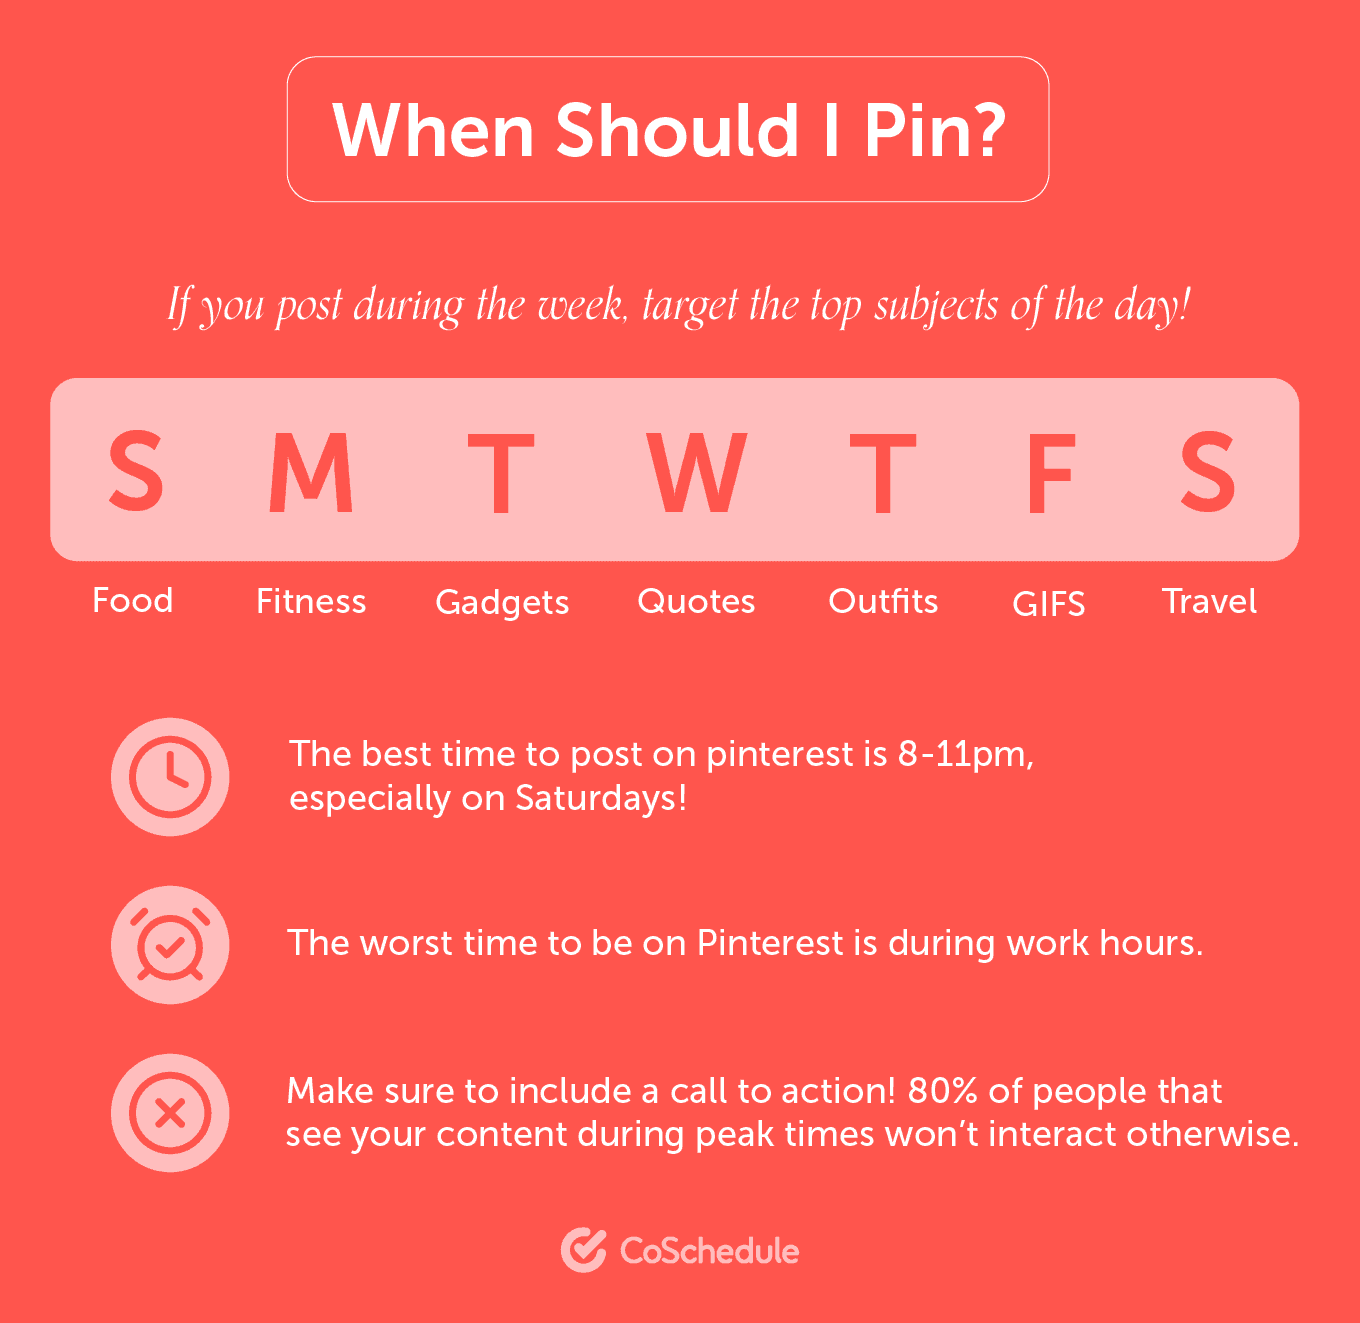 Best times to post on Pinterest